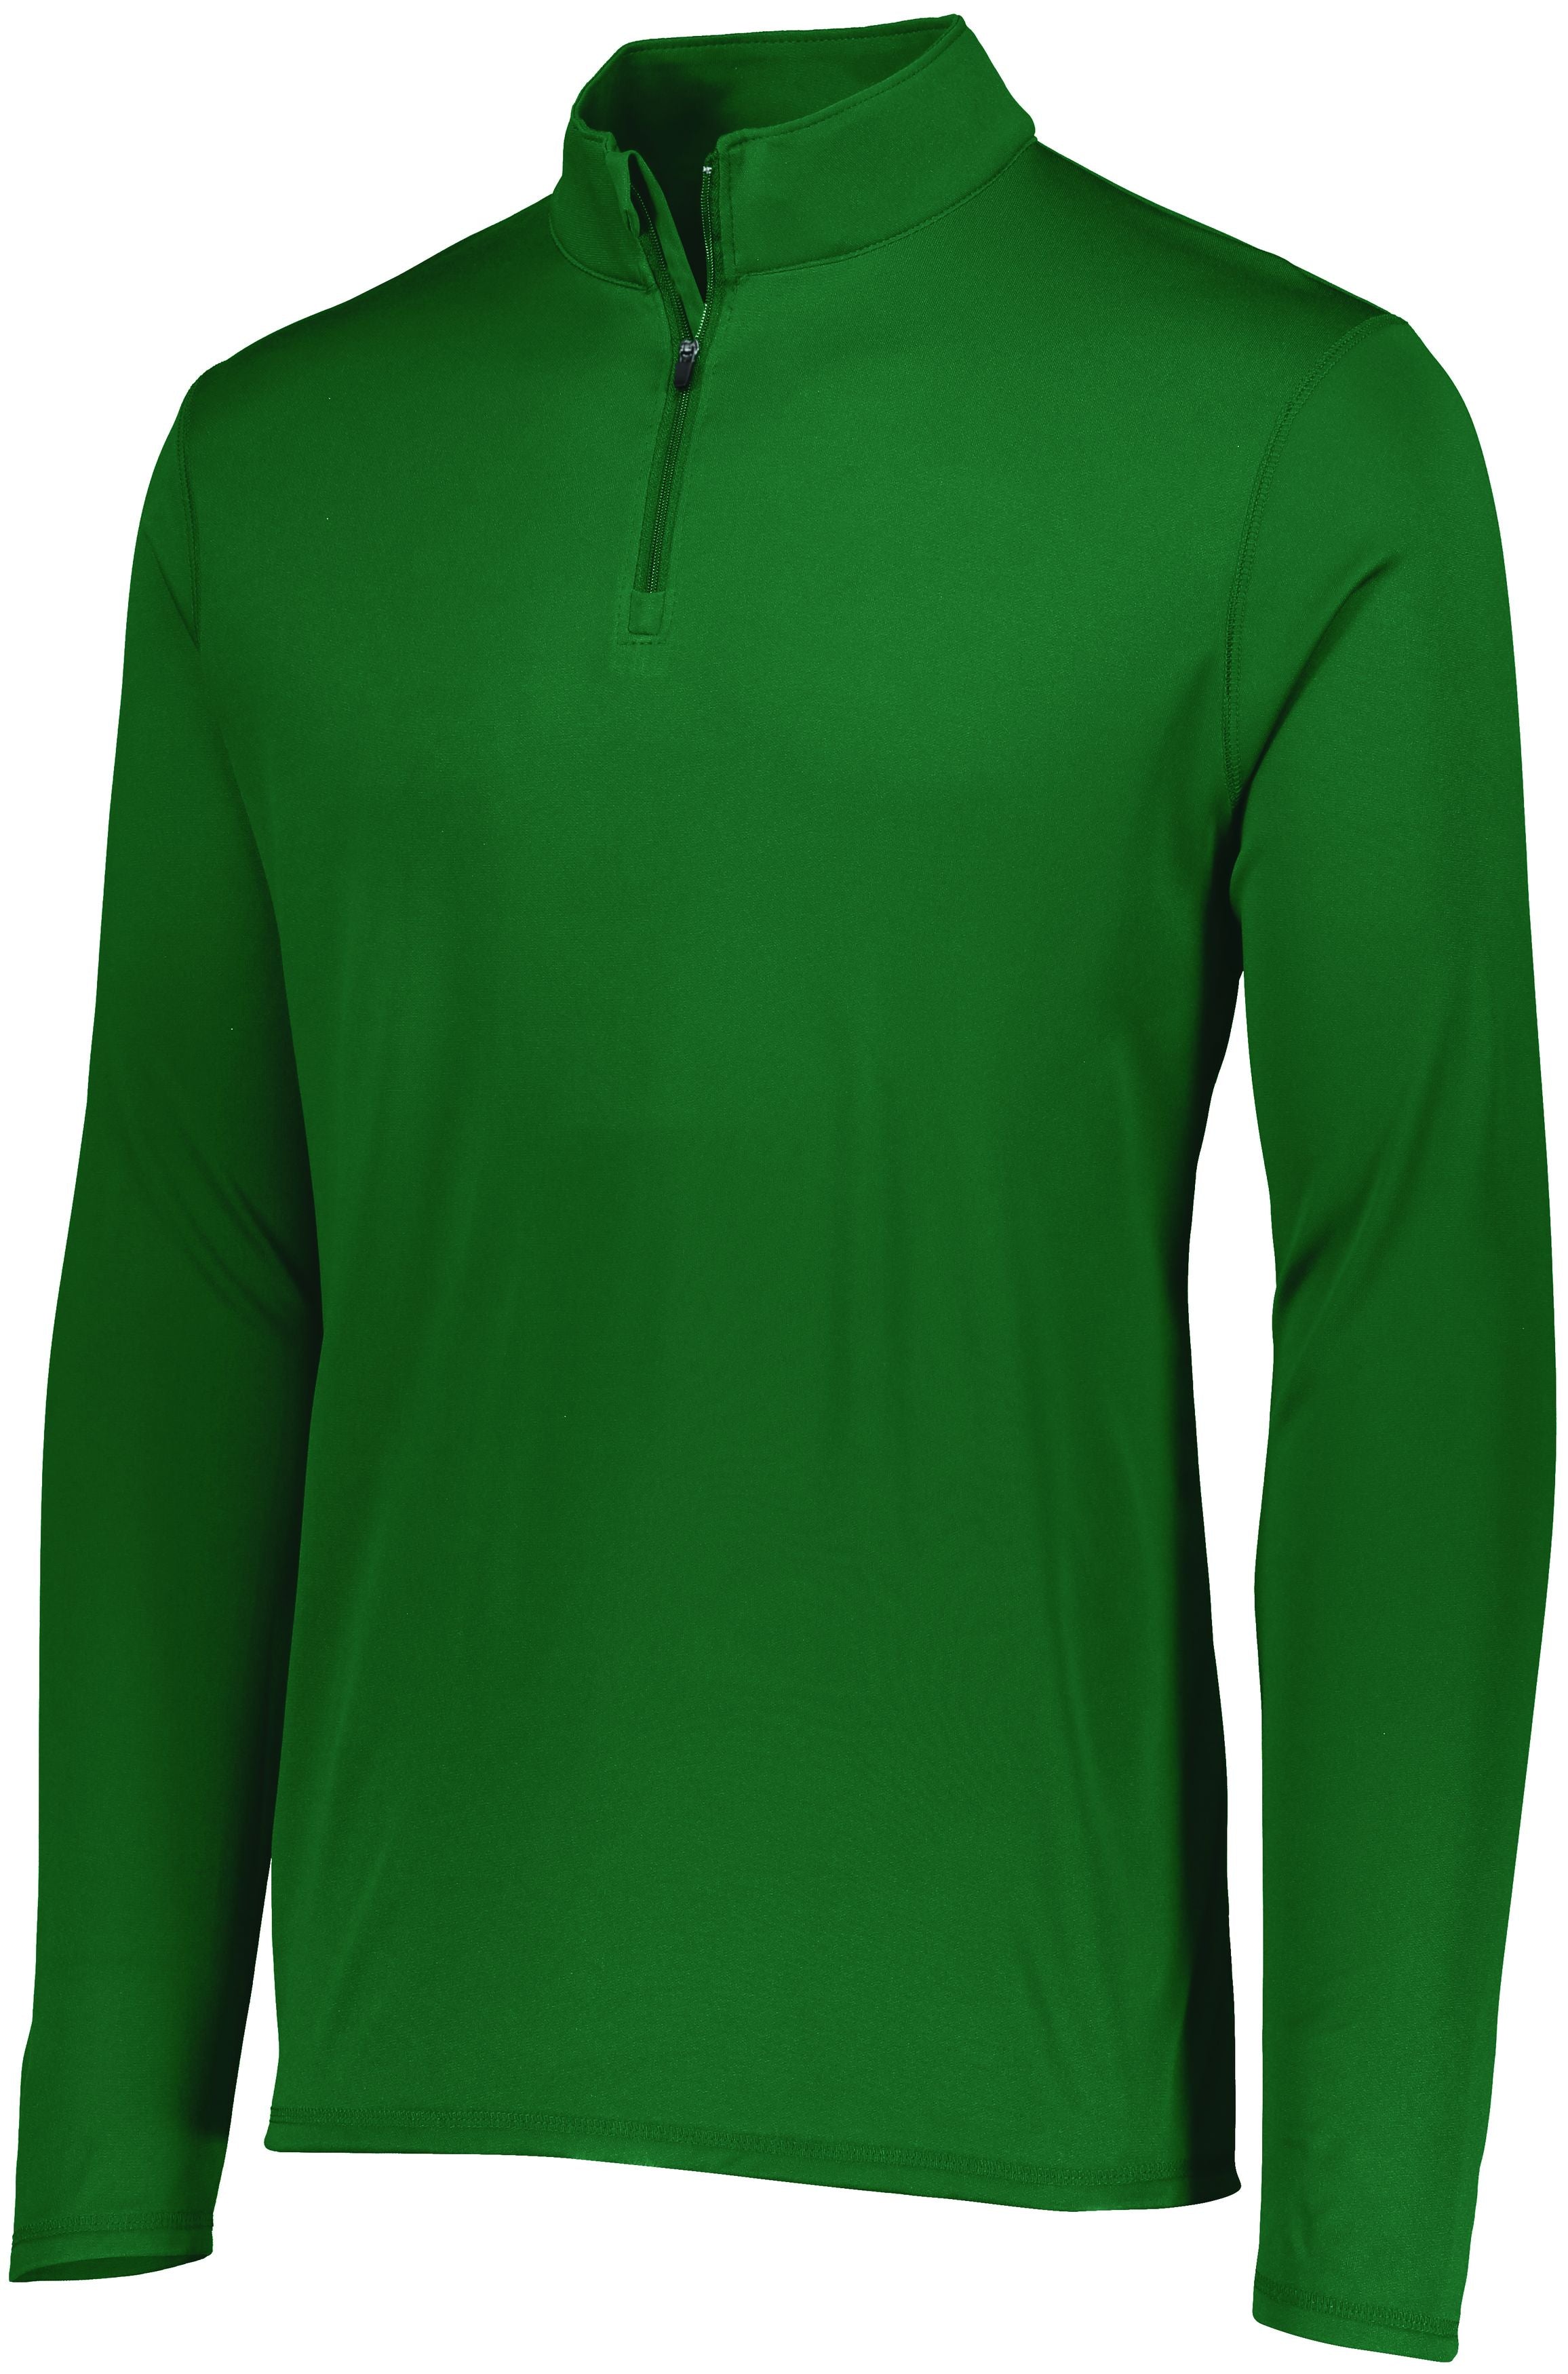 Augusta Sportswear Attain Wicking 1/4 Zip Pullover in Dark Green  -Part of the Adult, Adult-Pullover, Augusta-Products, Outerwear product lines at KanaleyCreations.com